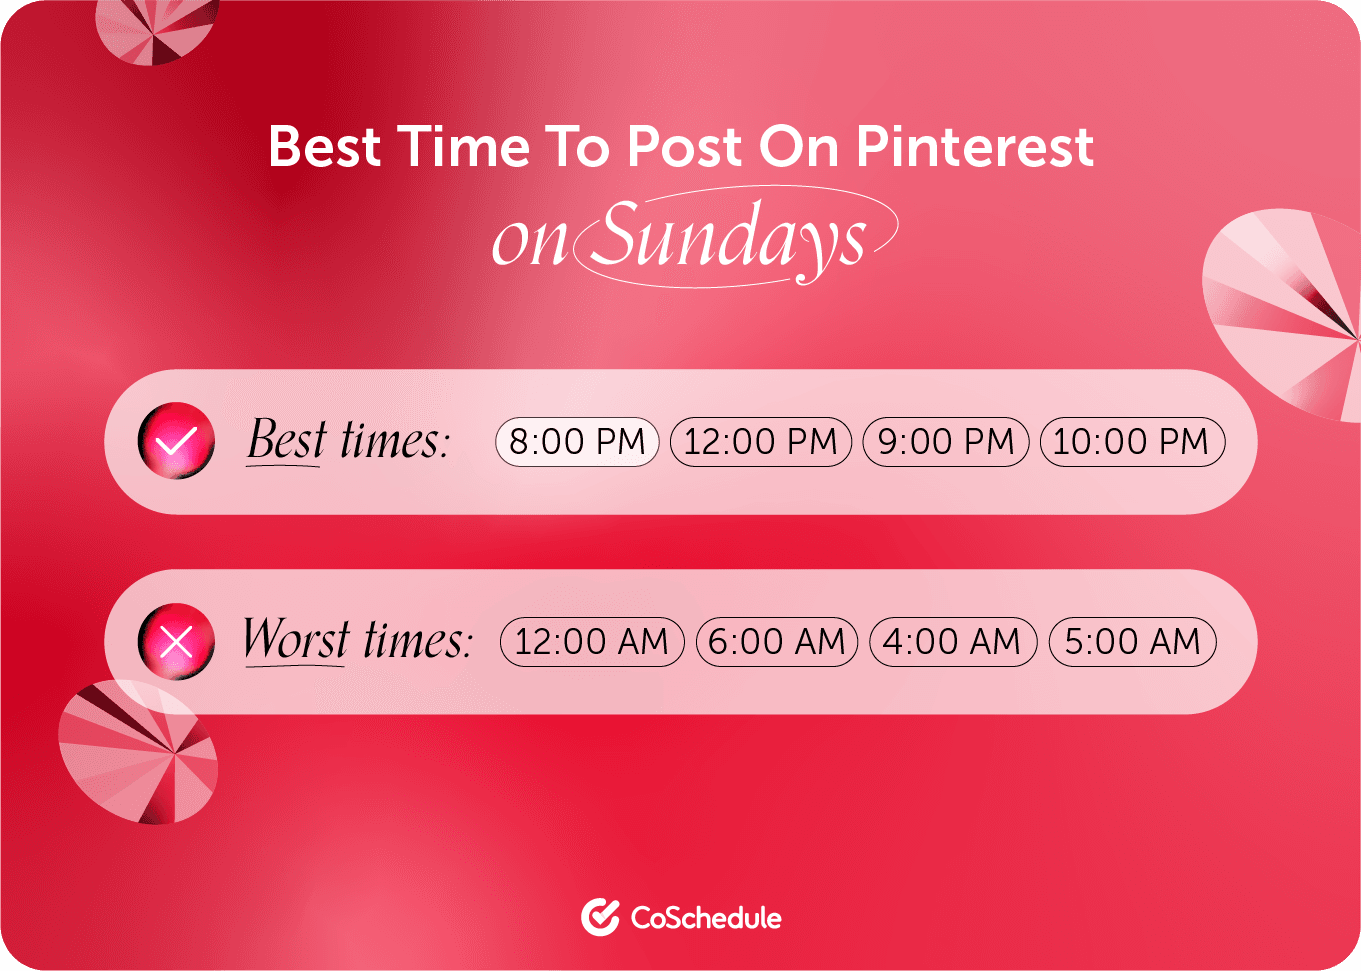 CoSchedule graphic on the best times to post on Pinterest Sundays